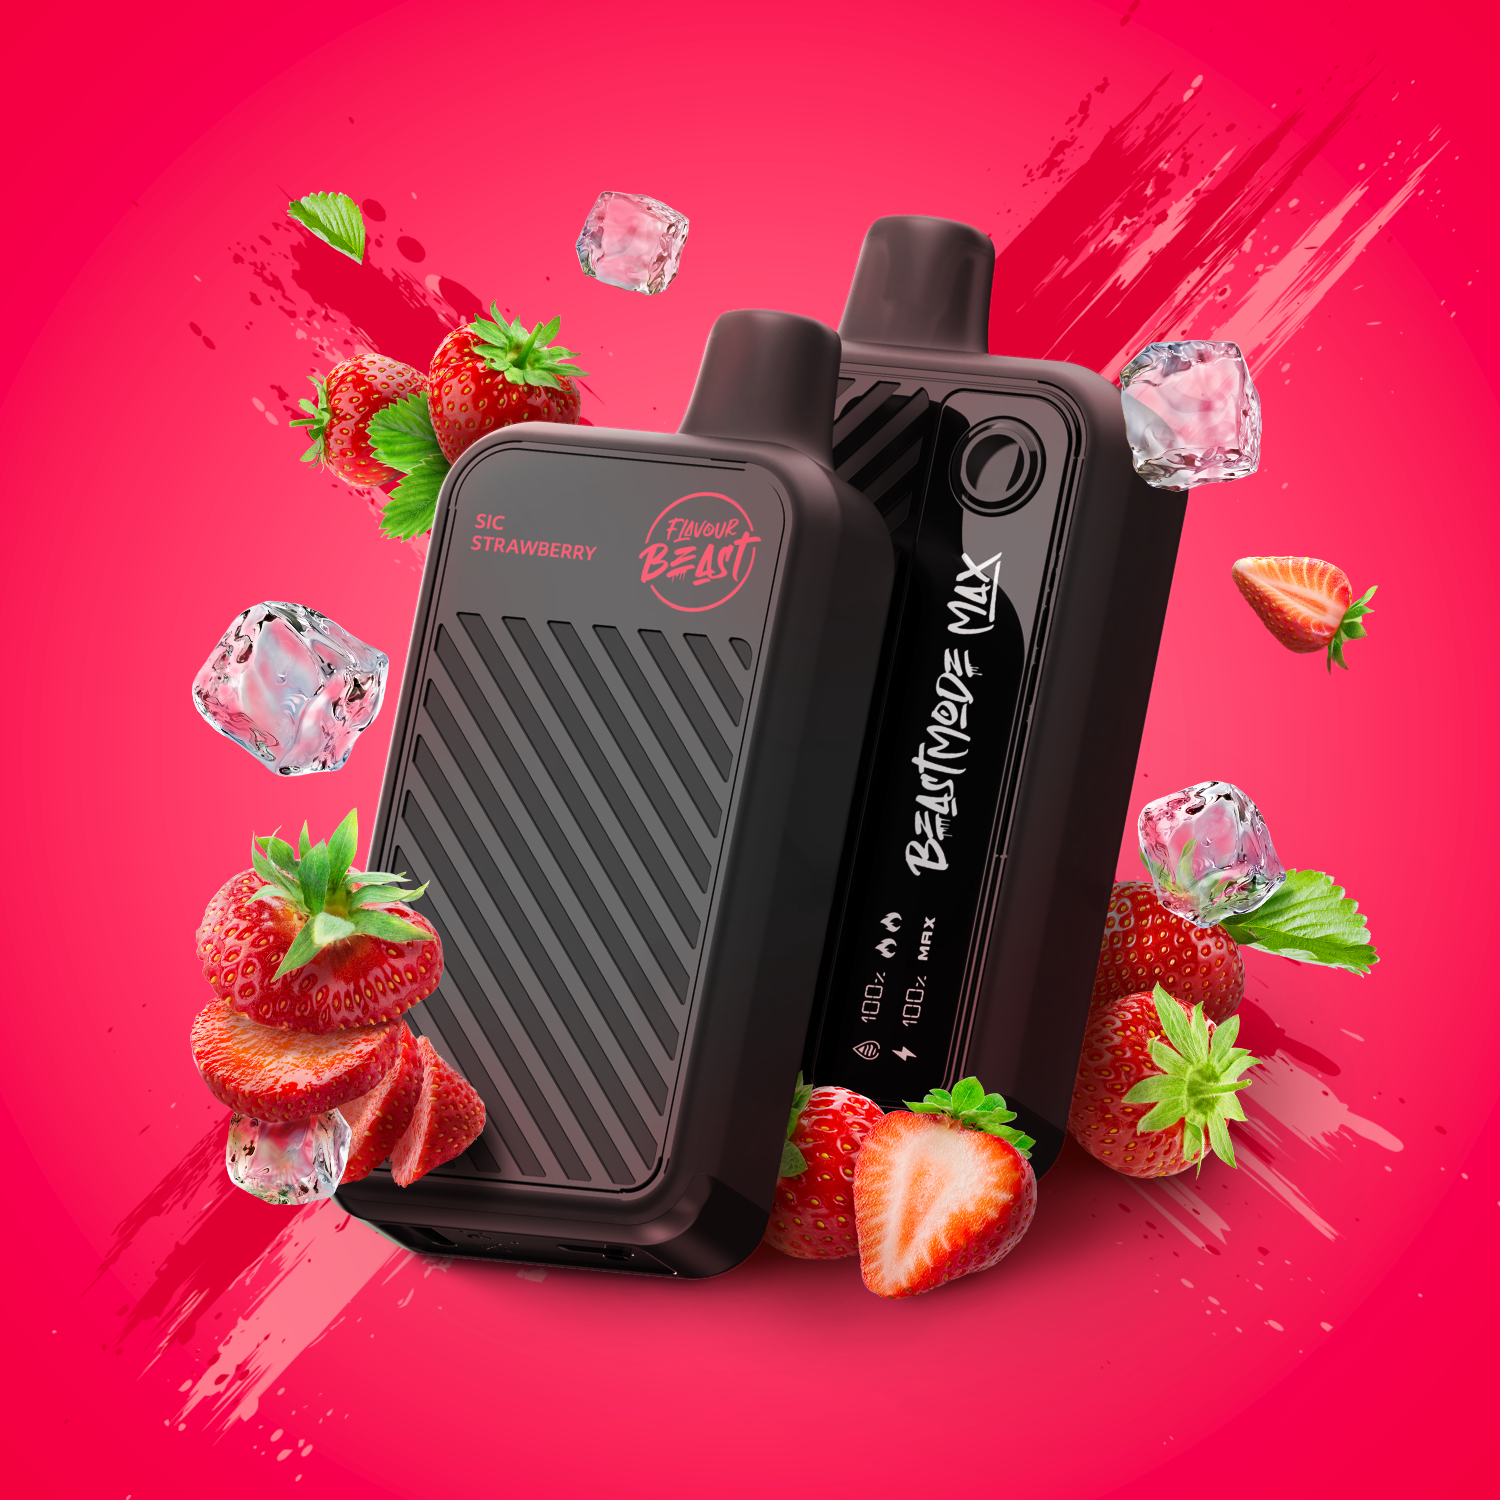 FLAVOUR BEAST 18000 STRAWBERRY ICED 20MG